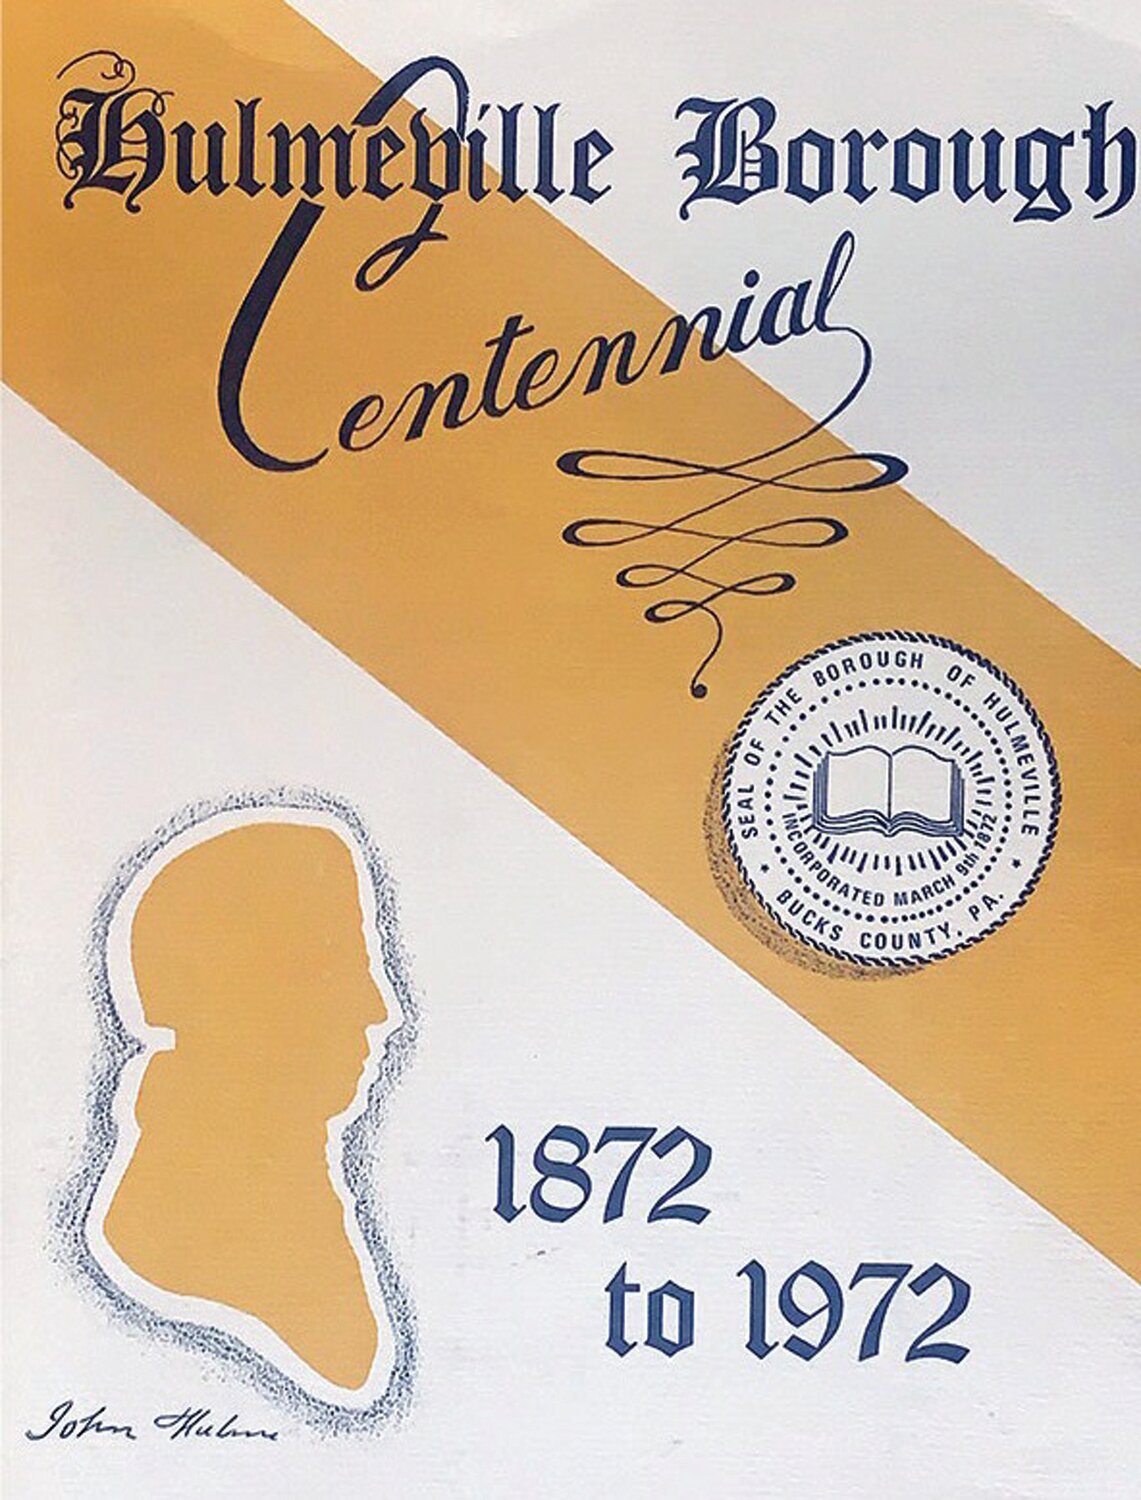 This image adorned the cover of the Hulmeville Borough Centennial History Book.